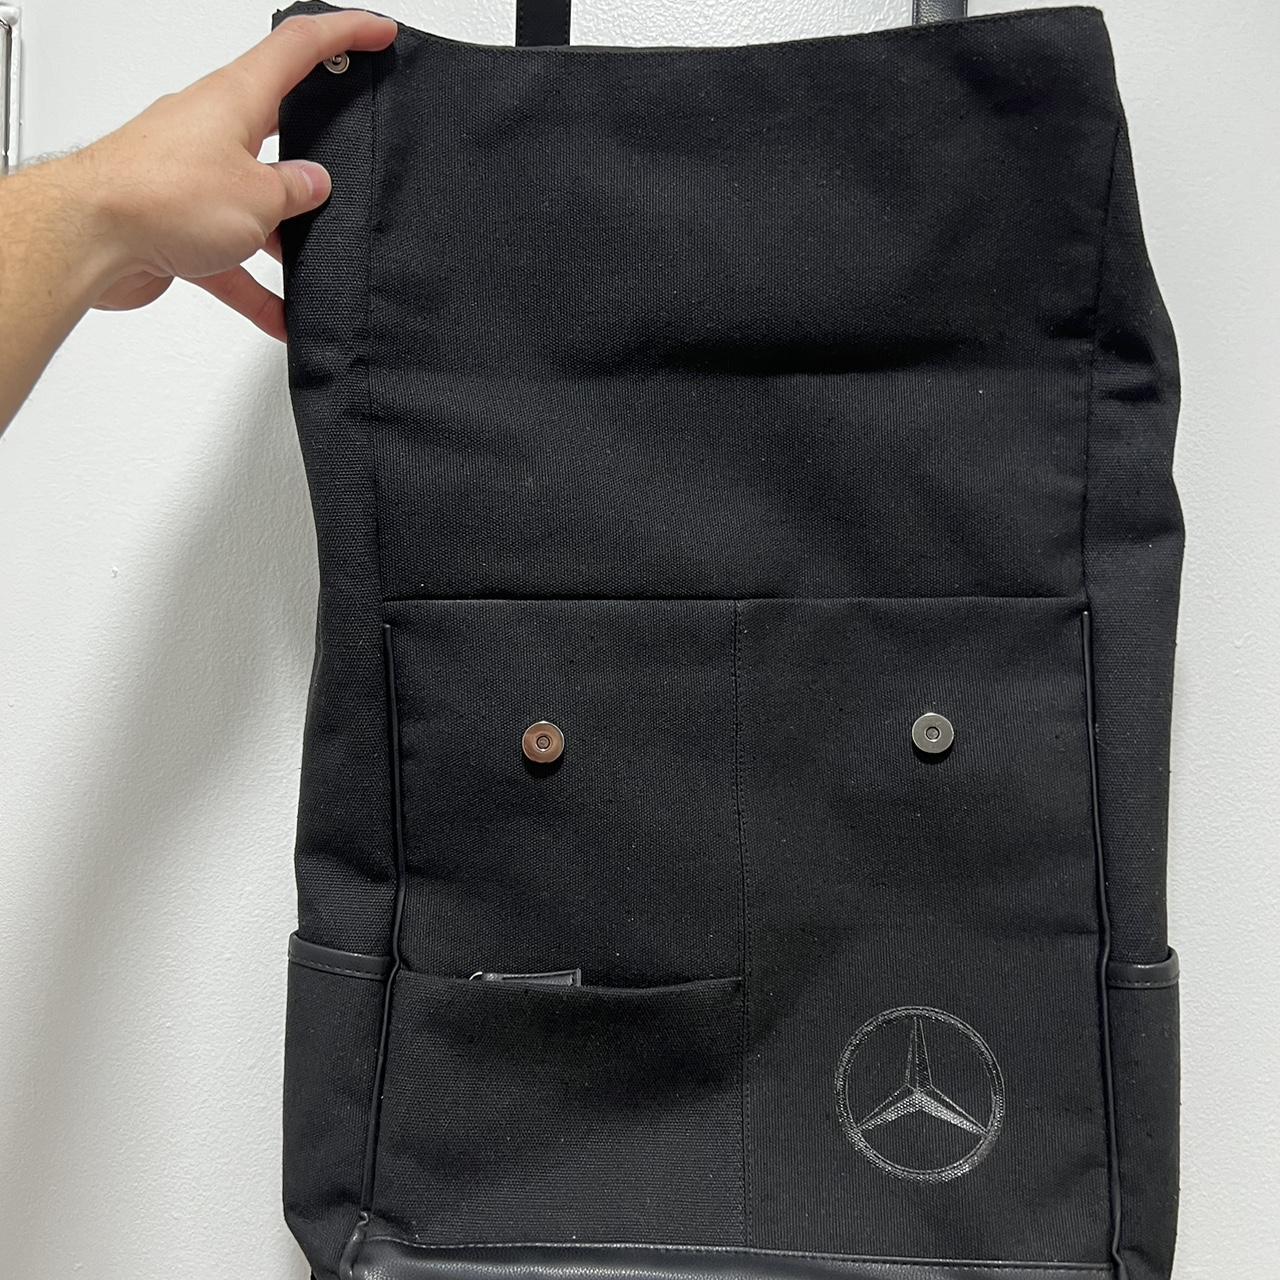 Mercedes Benz Backpack. Like new, tags included. Pet - Depop